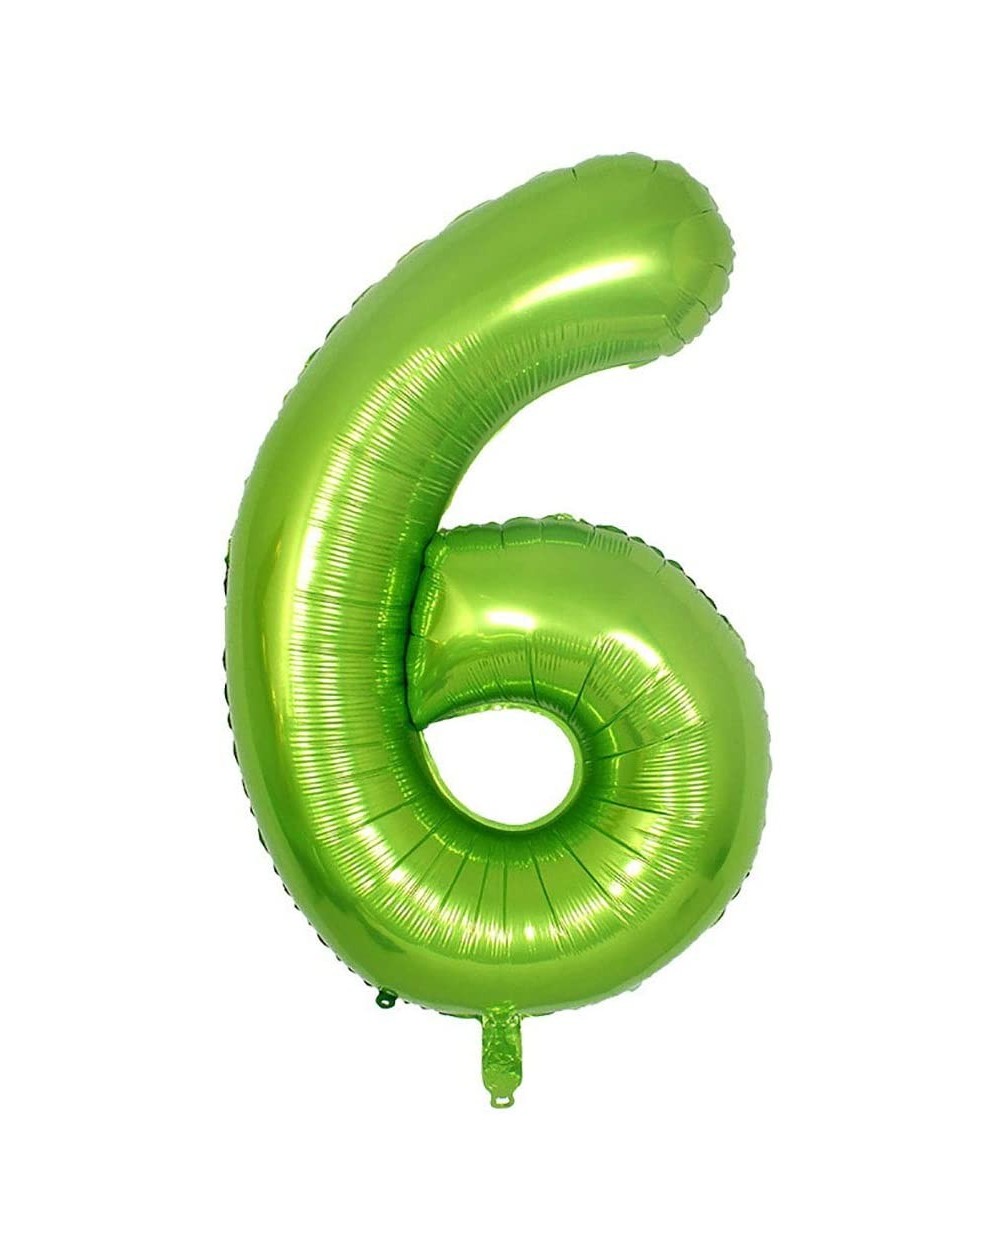 Balloons 40 Inch Green Alphabet Letter Foil Helium Digital Balloons Number 6 for Birthday Anniversary Party Festival Decorati...